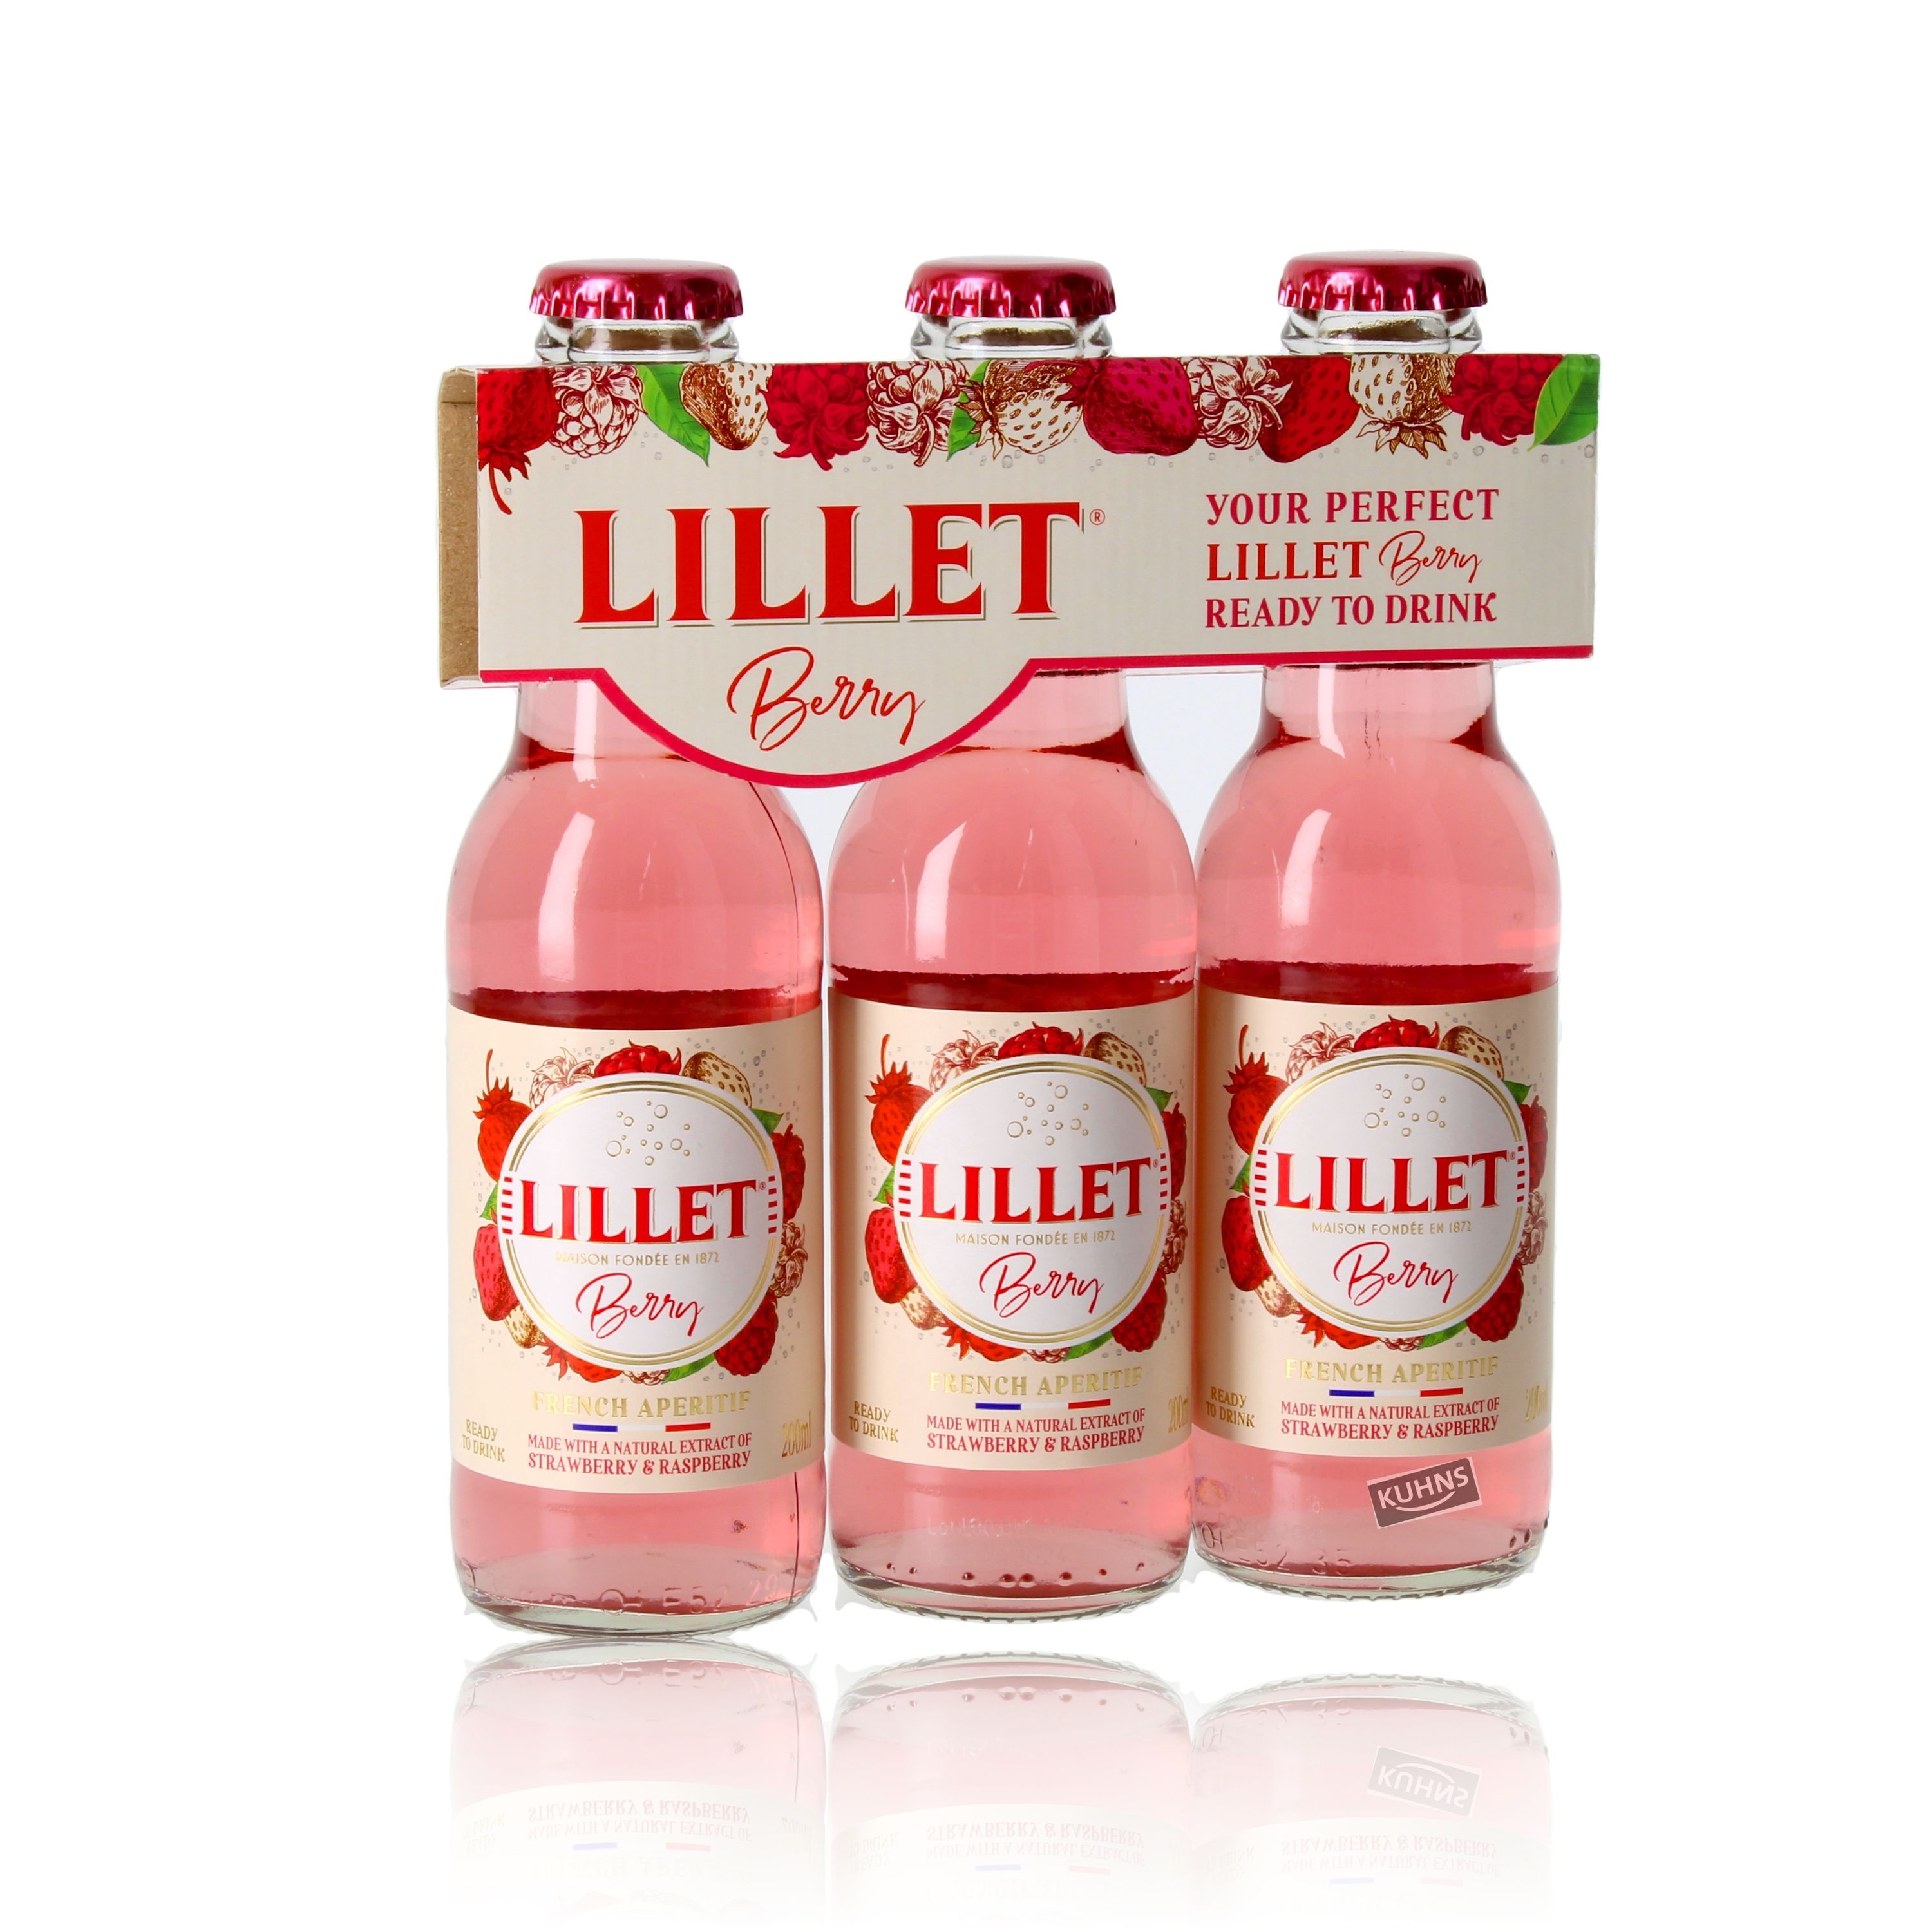 Lillet Berry Ready to Drink 3x0.2l, alc. 10.3% by volume, wine-liqueur mix France